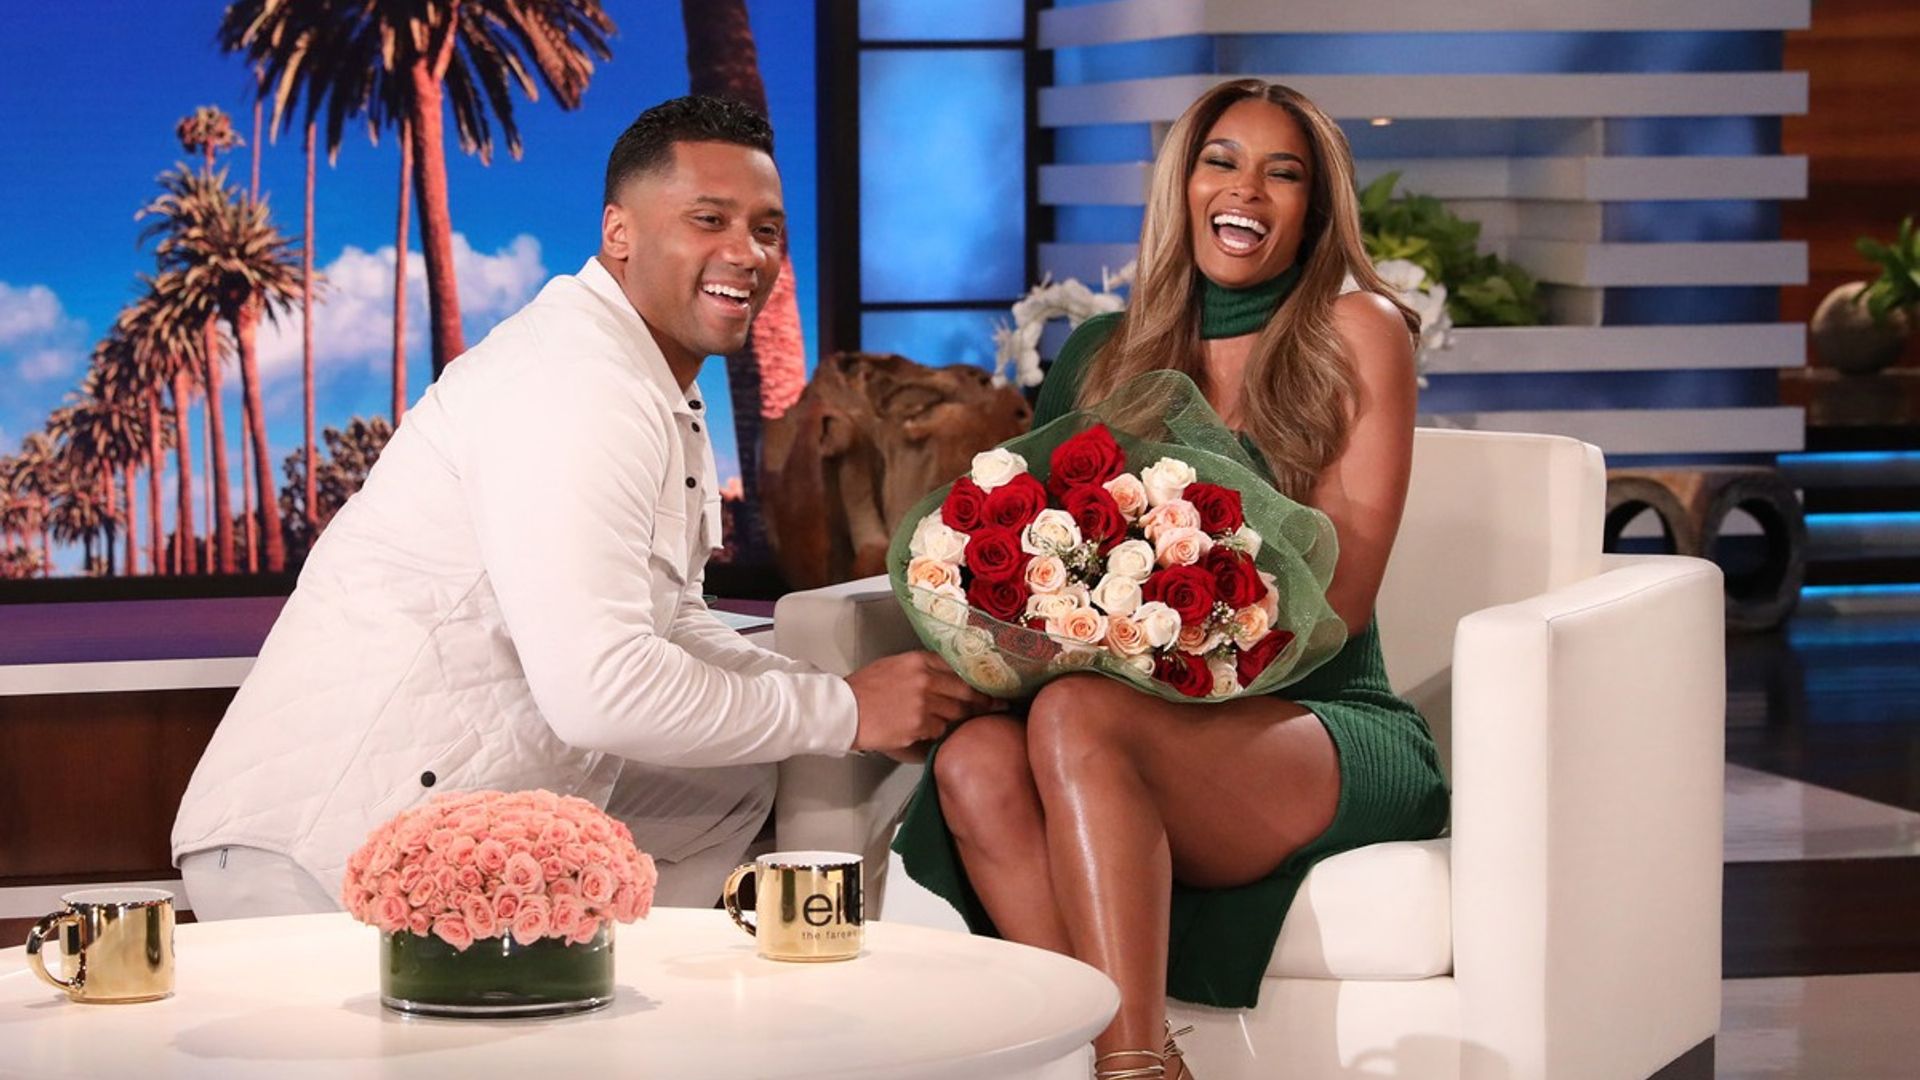 Ciara's husband Russell Wilson drops to one knee to propose having more babies